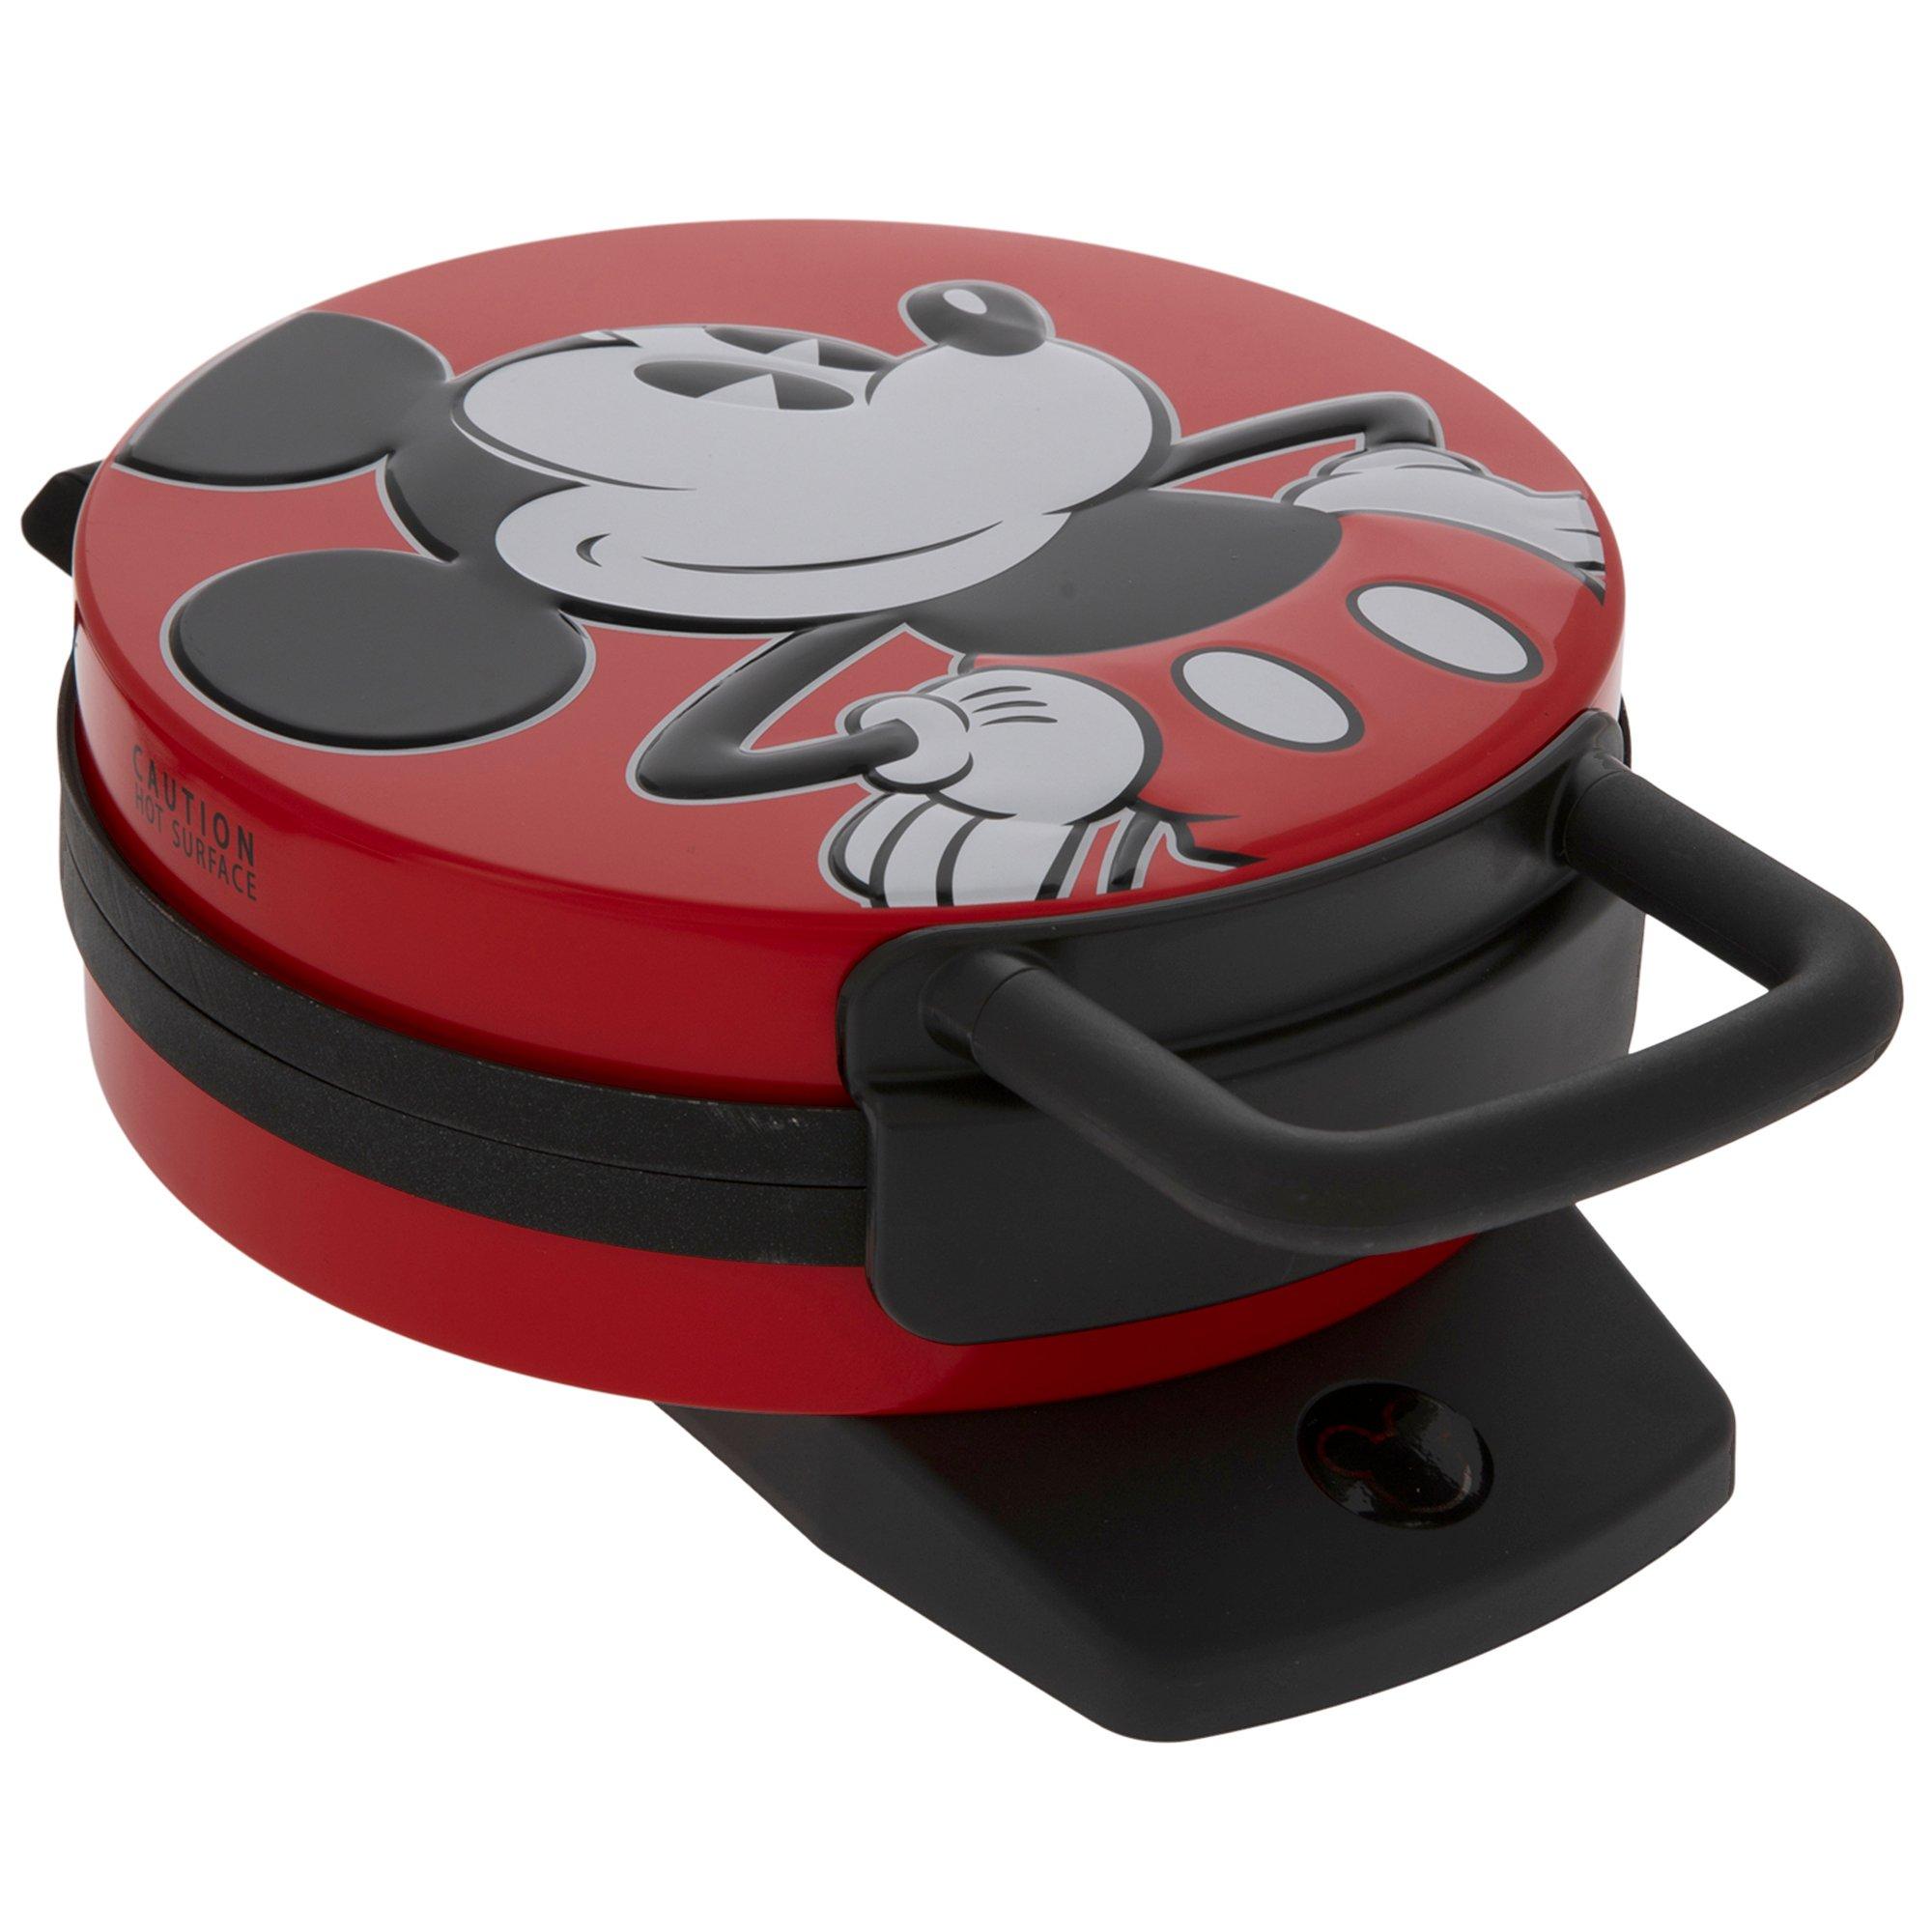 Disney Mickey Mouse Waffle Maker for Sale in San Diego, CA - OfferUp